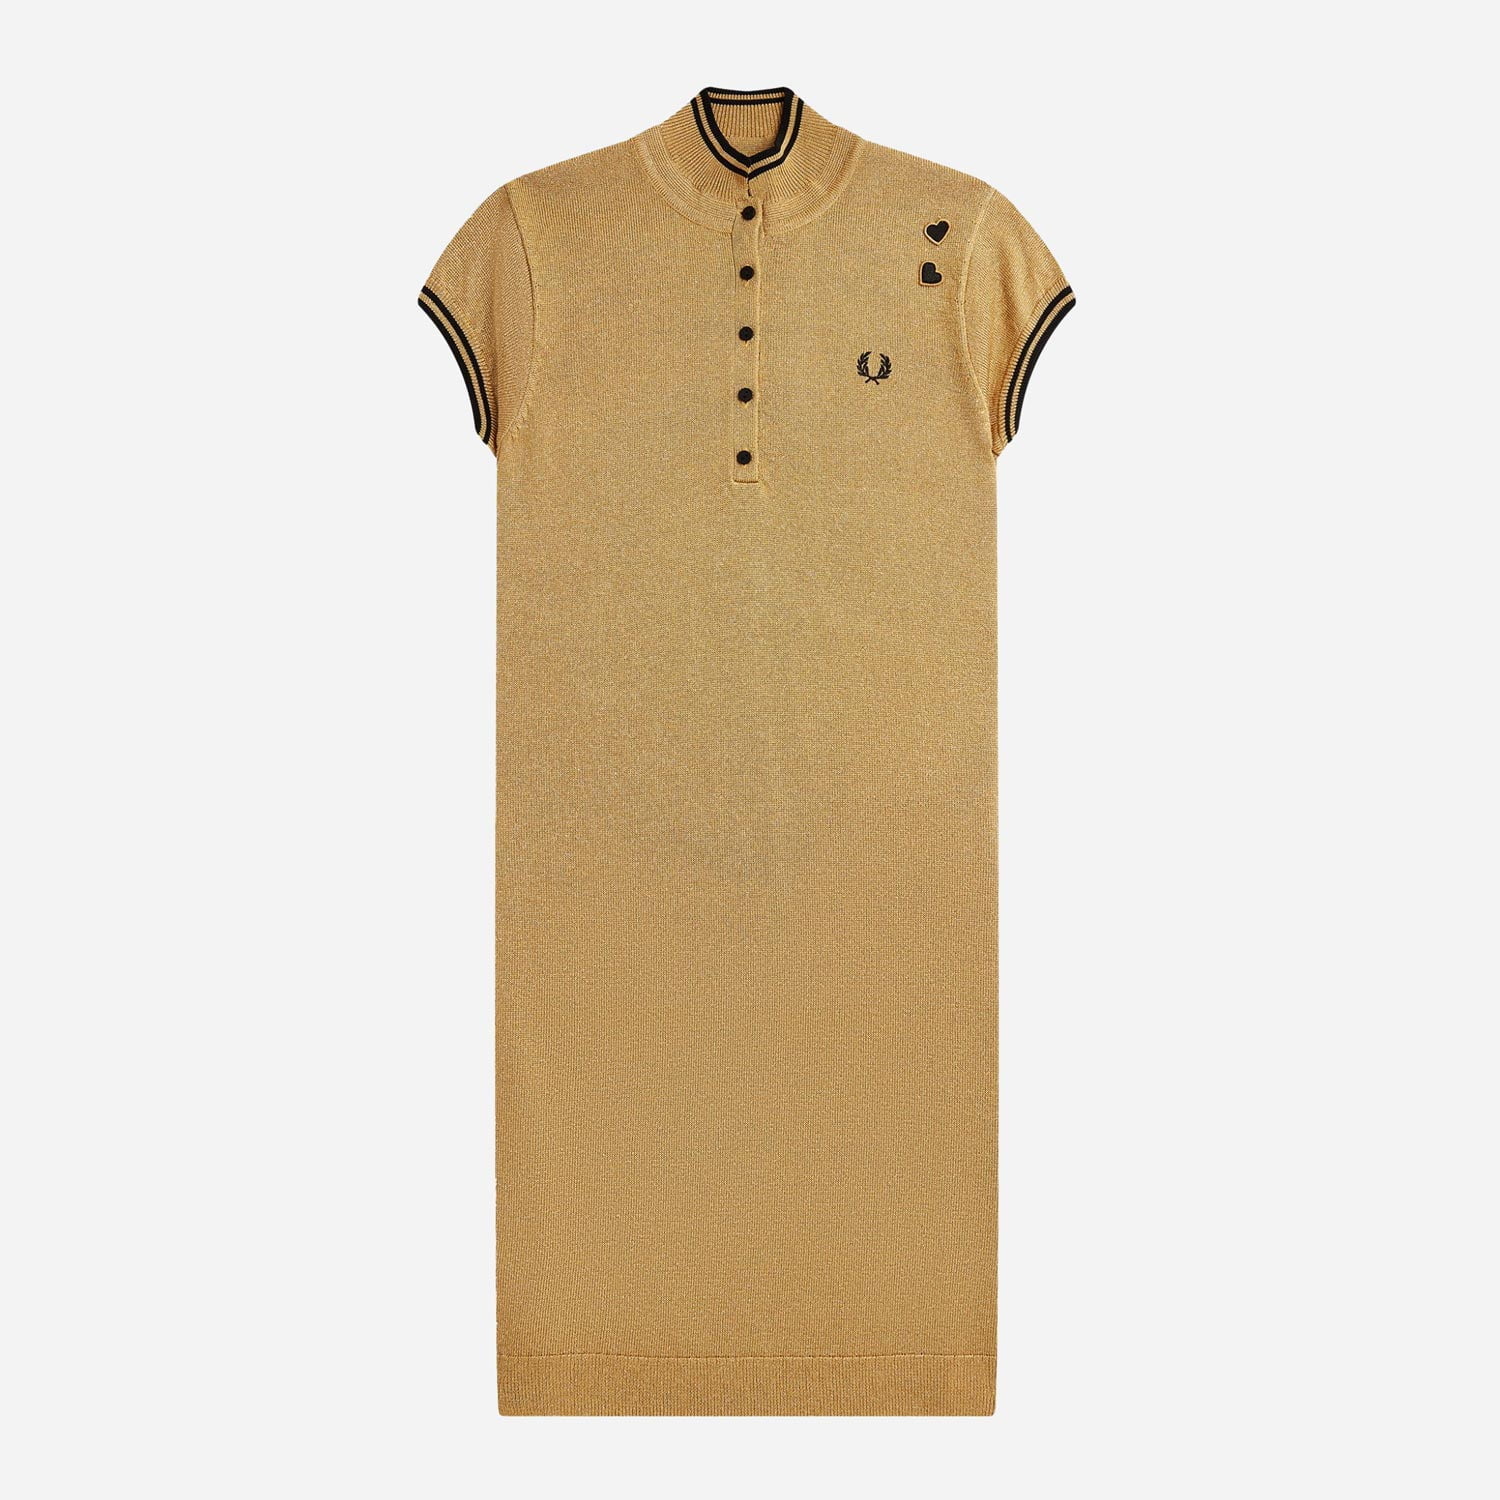 Fred Perry Women's Metallic Knitted Dress - 1964 Gold